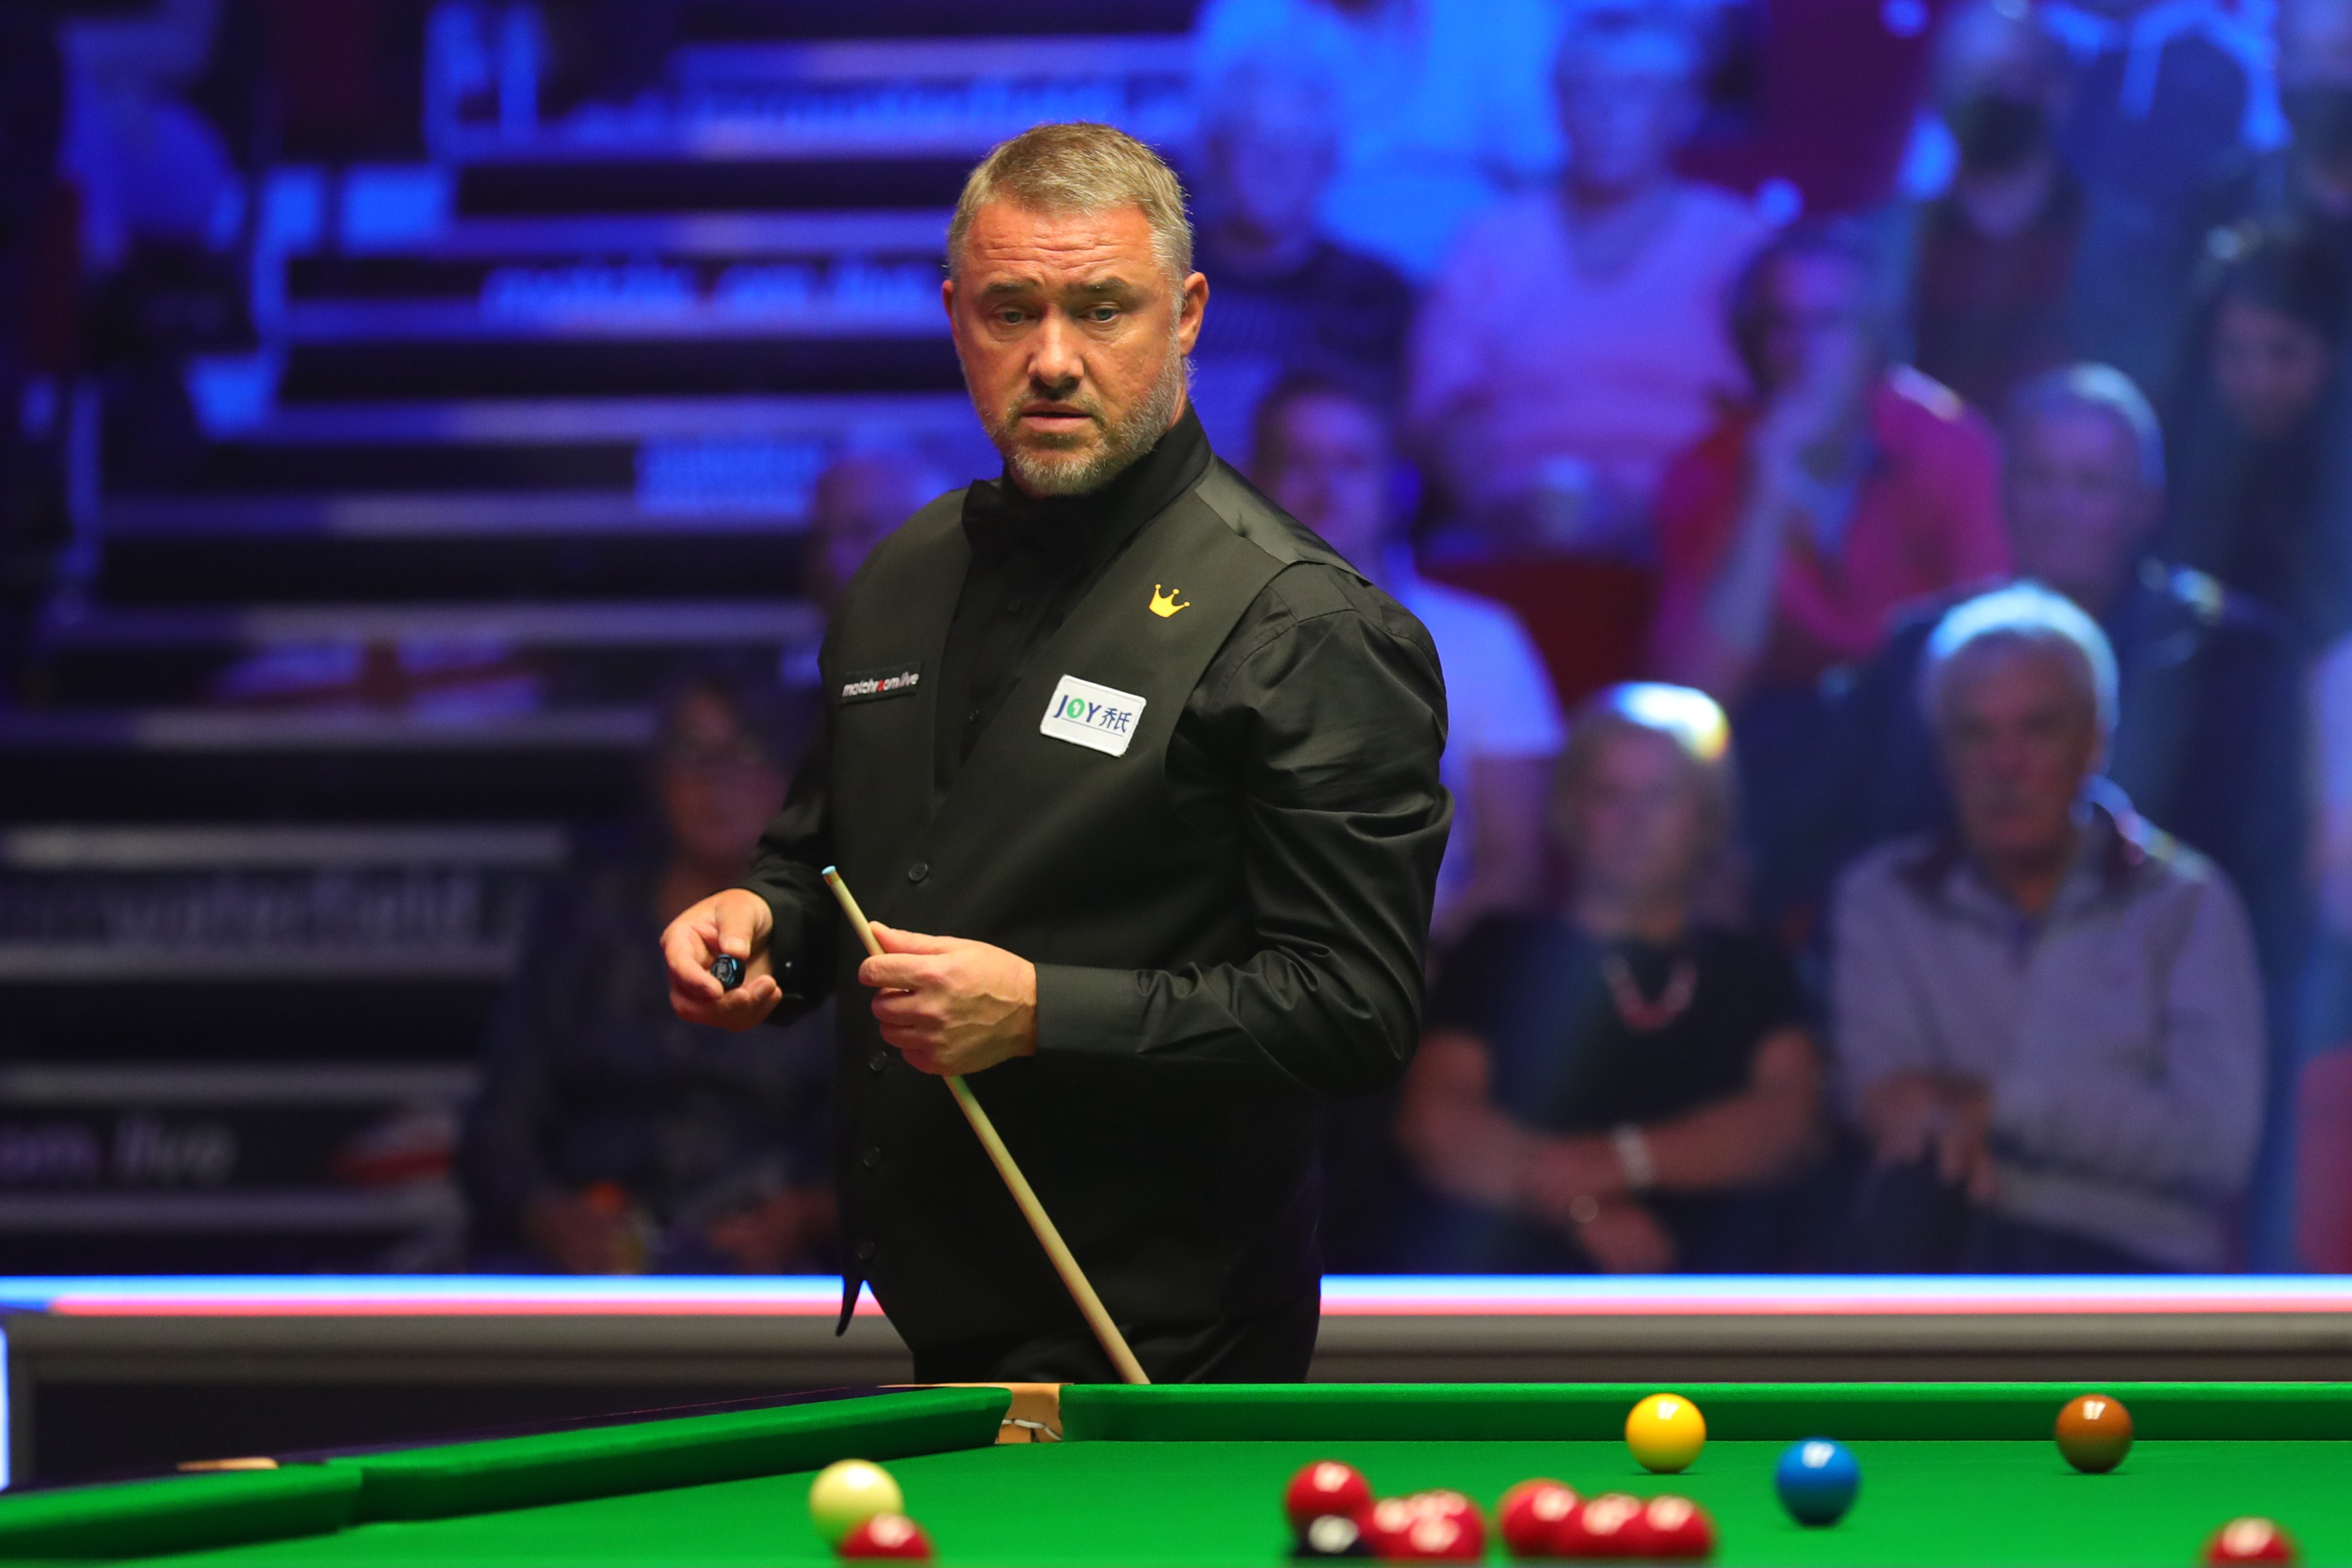 Stephen Hendry secures big win as English Open qualifiers are completed